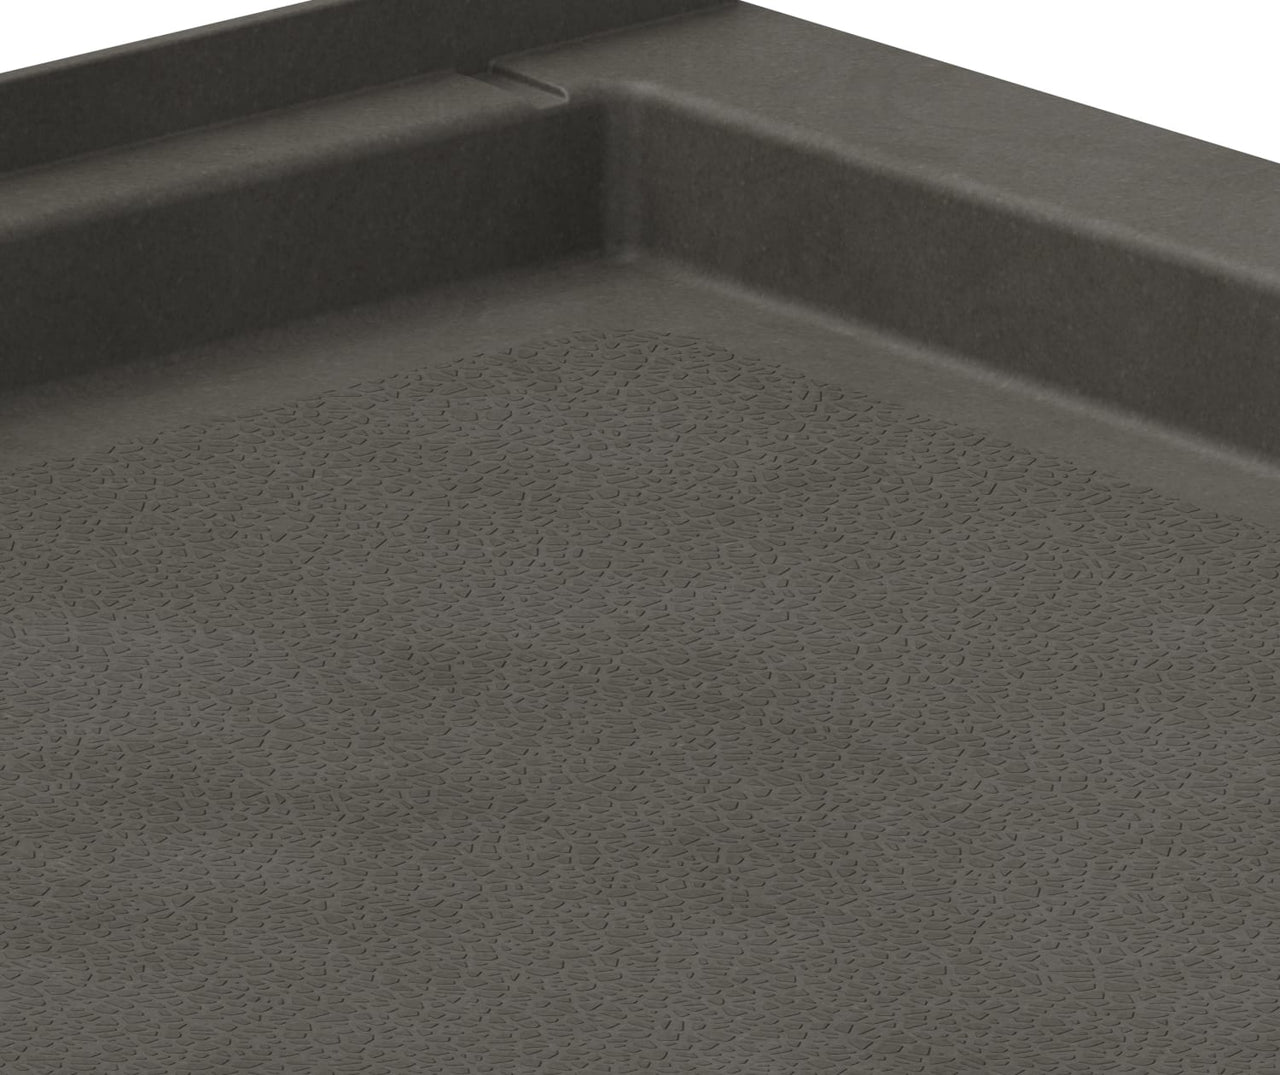 SS-3460 34 x 60 Swanstone Alcove Shower Pan with Center Drain Charcoal Gray